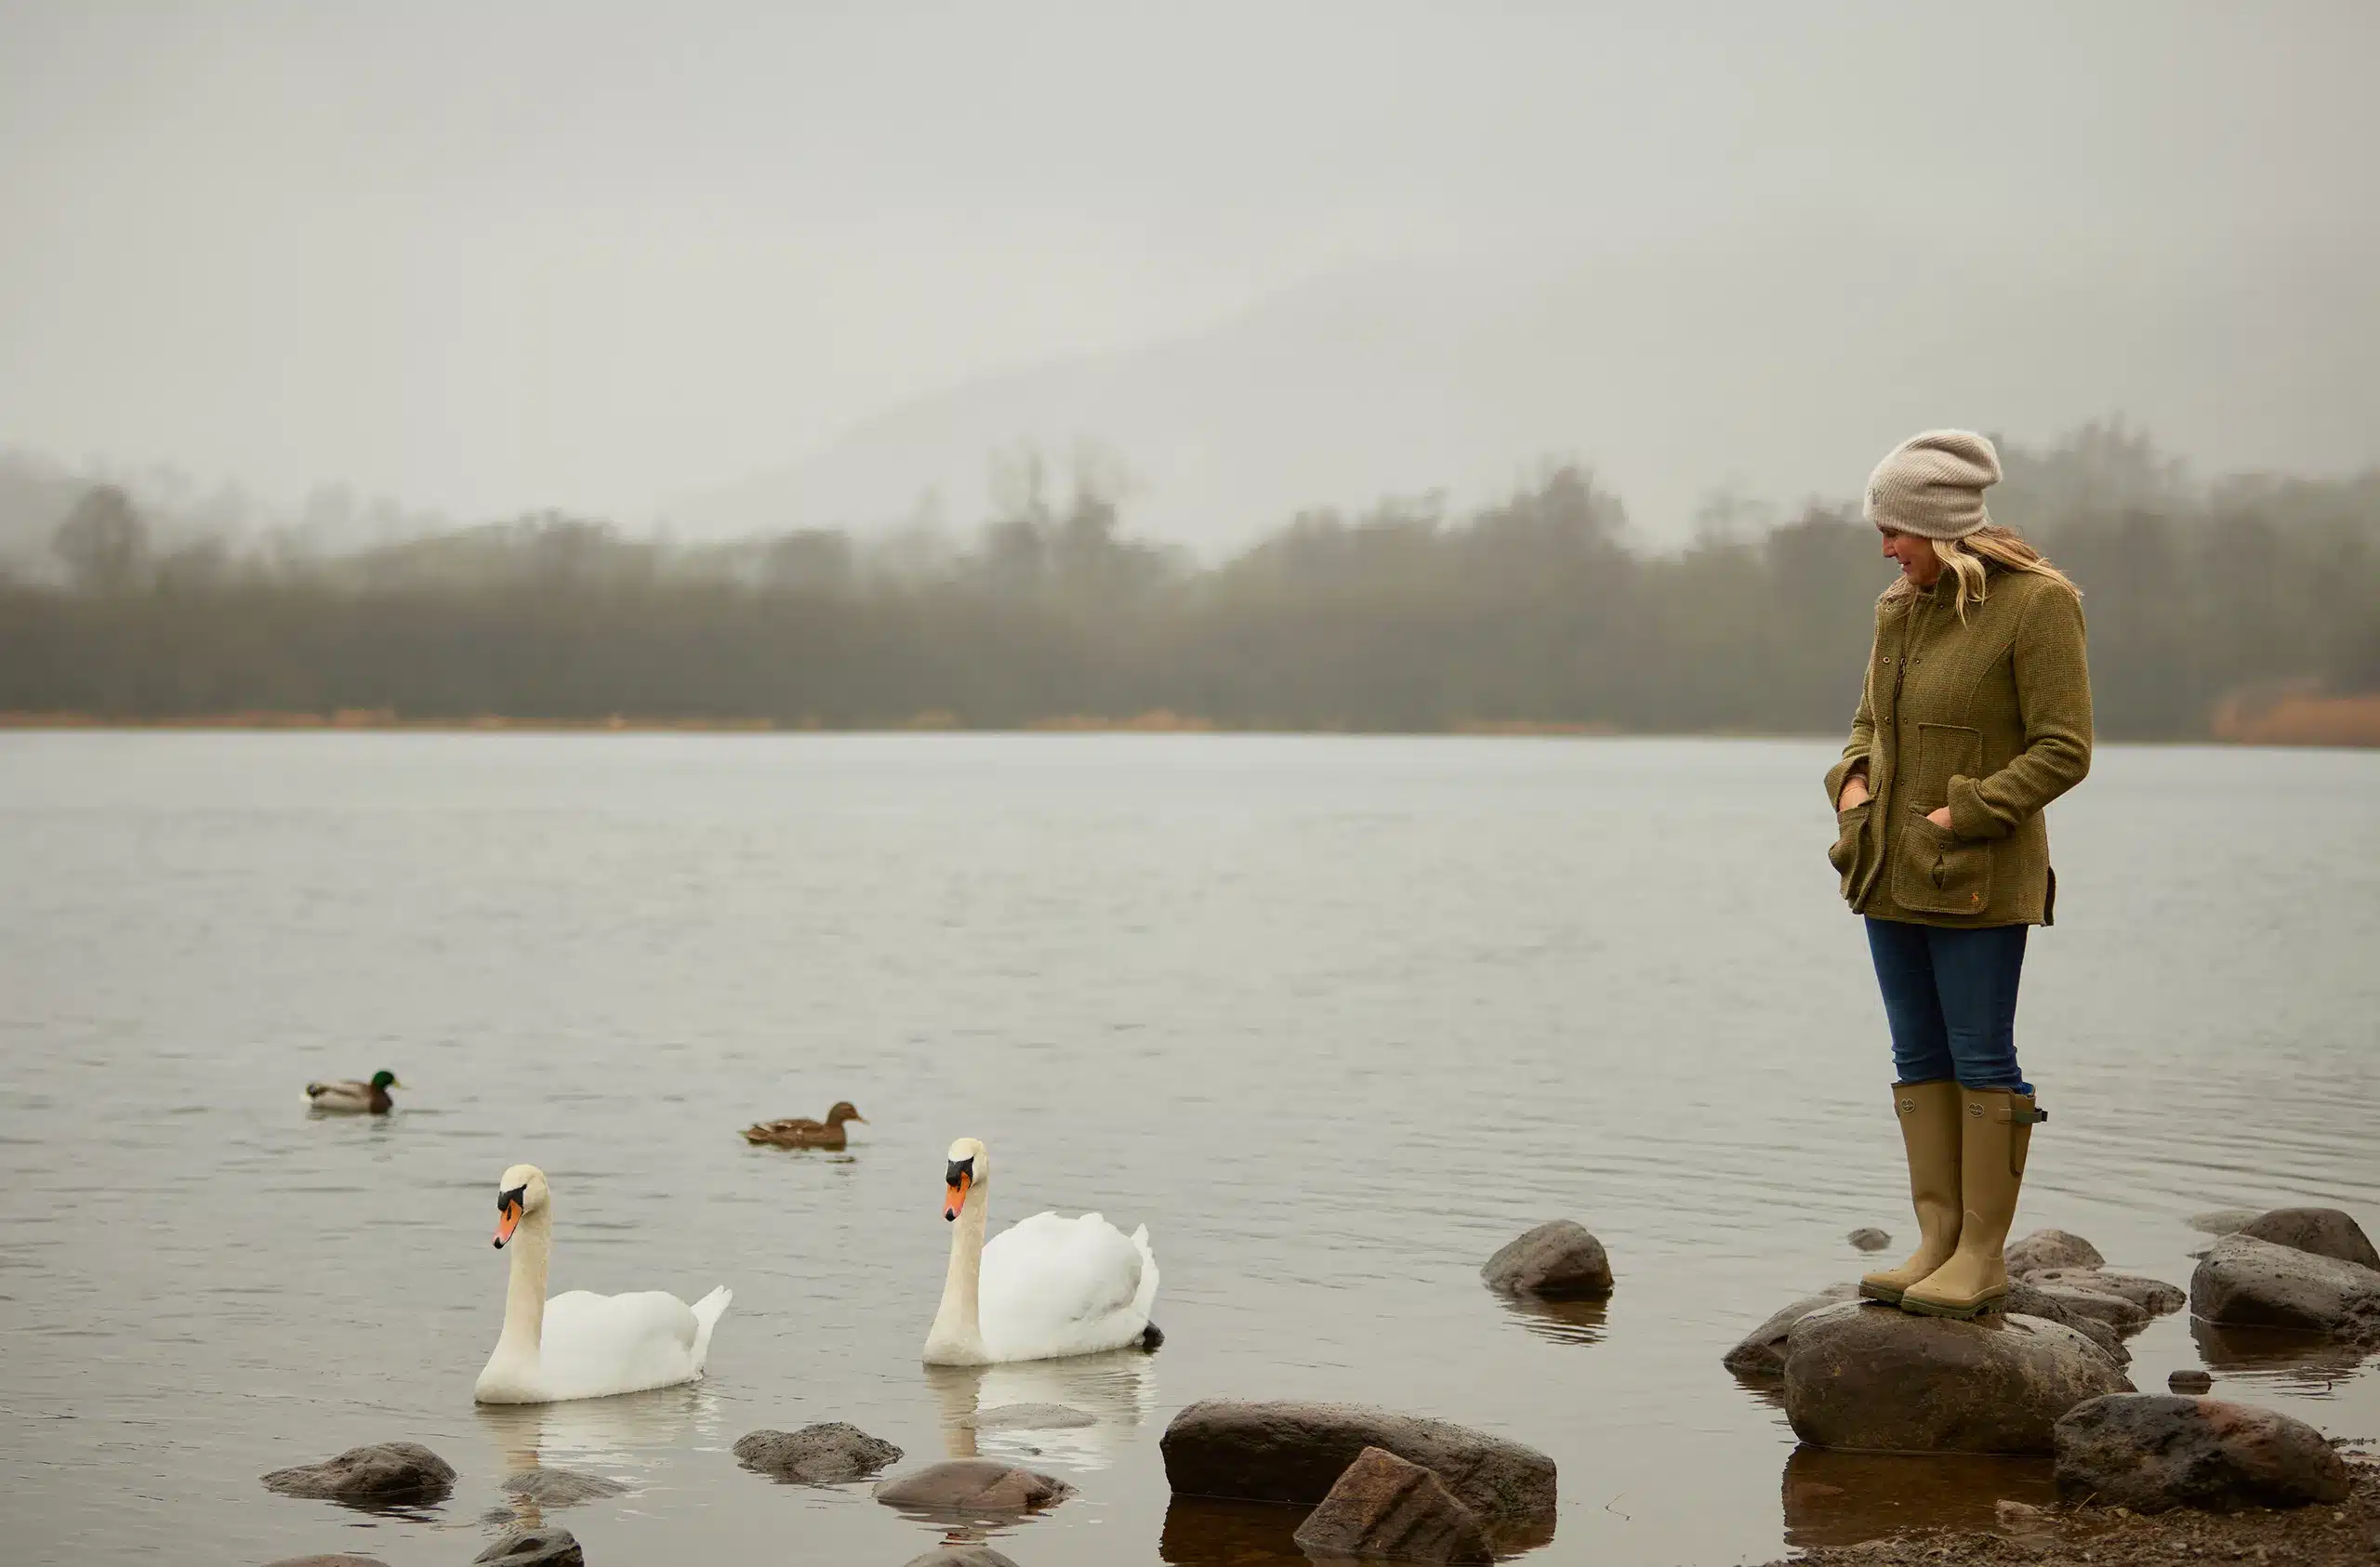 katharine pooley, the uks best interior designer, near her home in the lake district with some swans